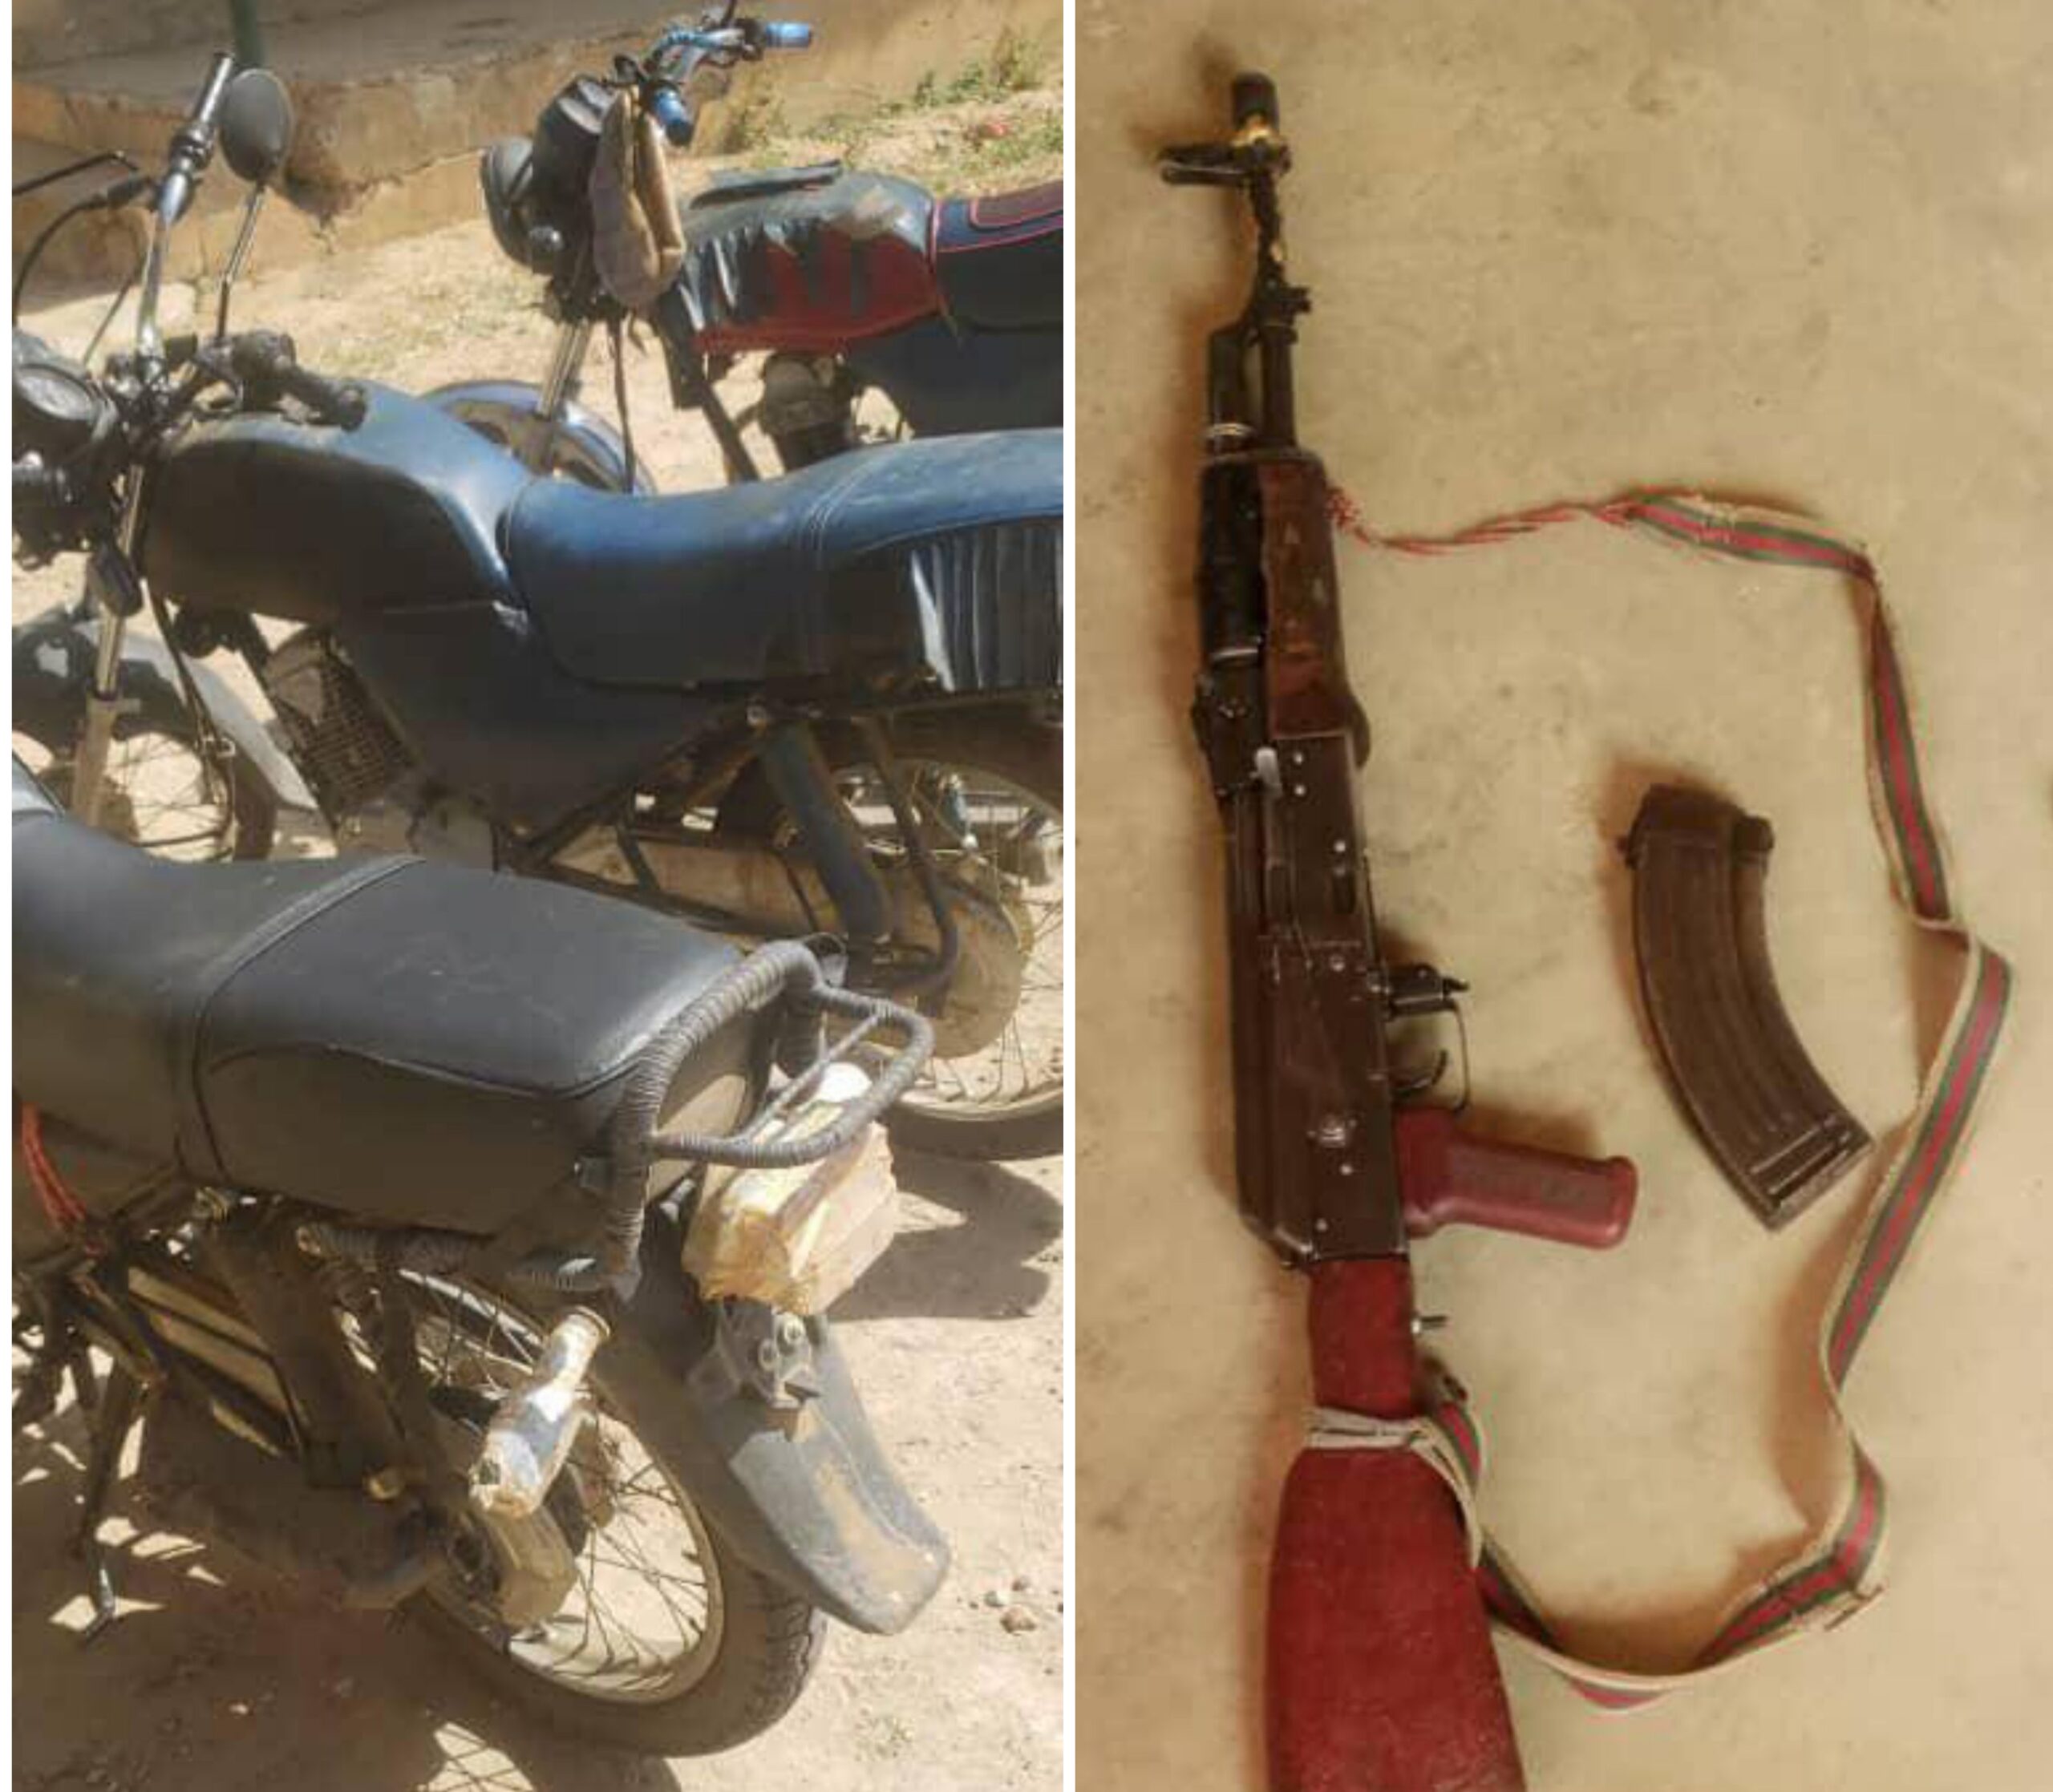 Troops subdue bandits in gun duels, recover weapons, motorcycles in Kaduna